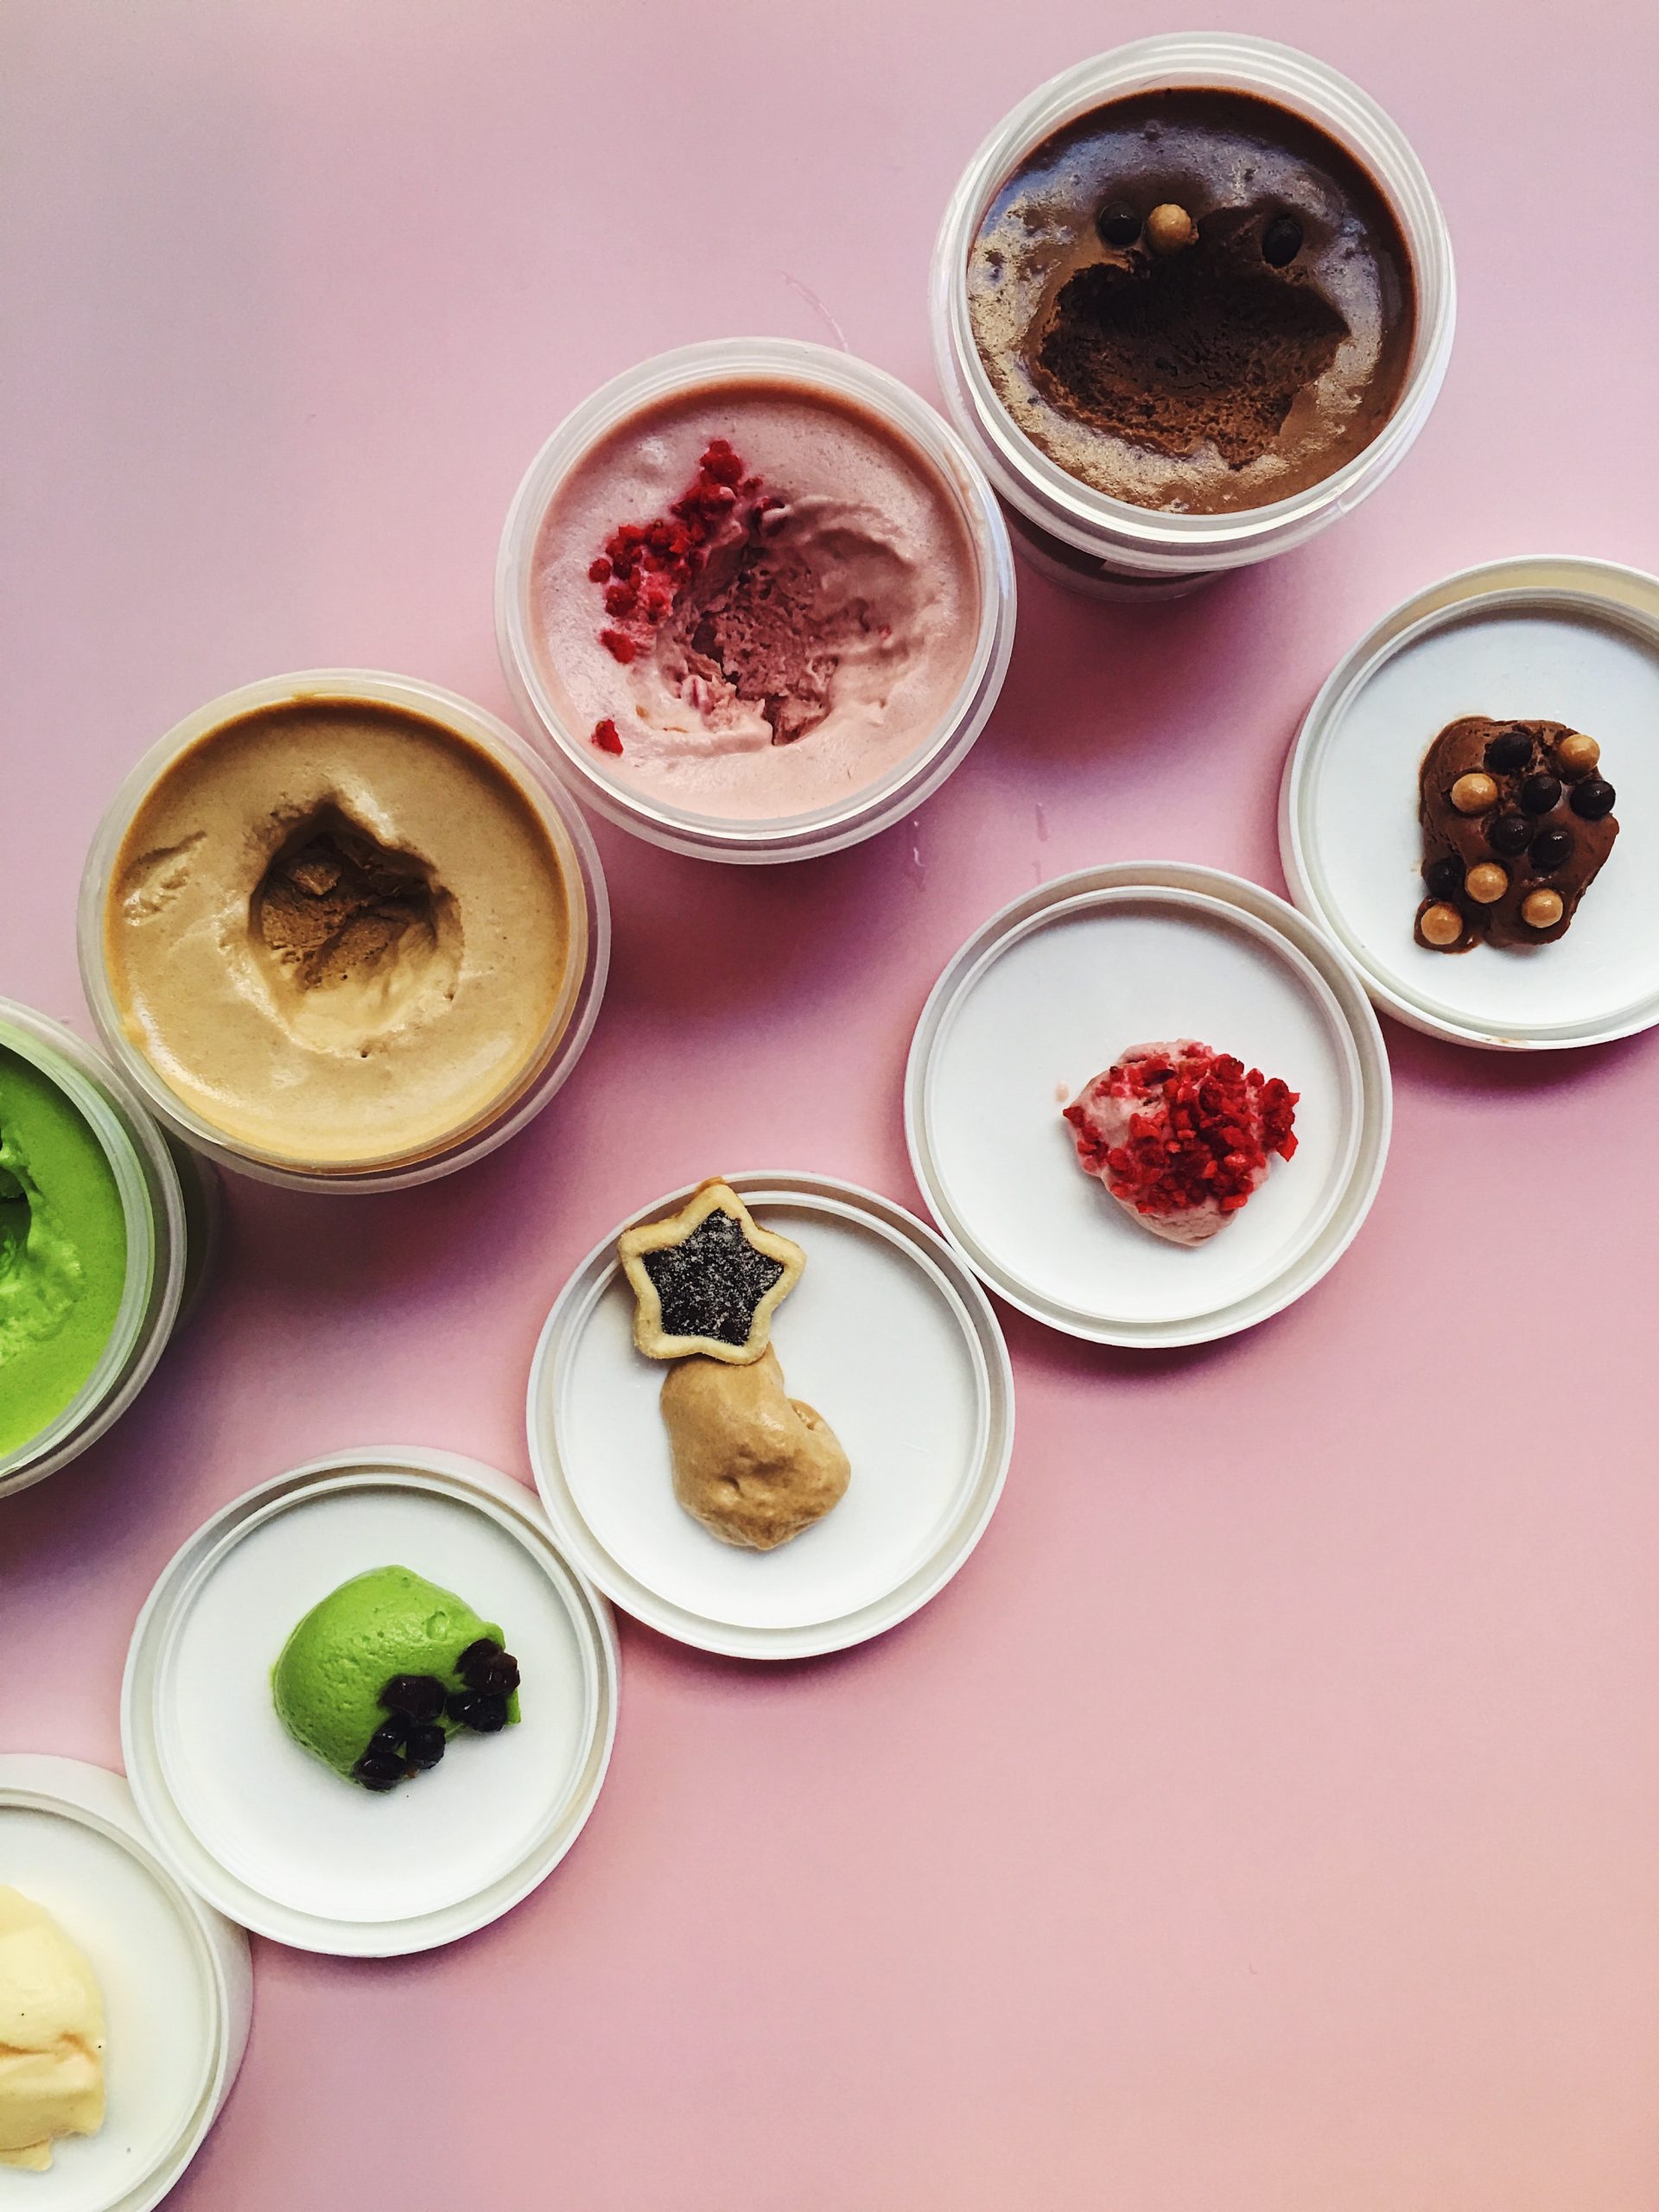 Bird's eye view of dessert jars lined up with accompanying lids with samples from each jar